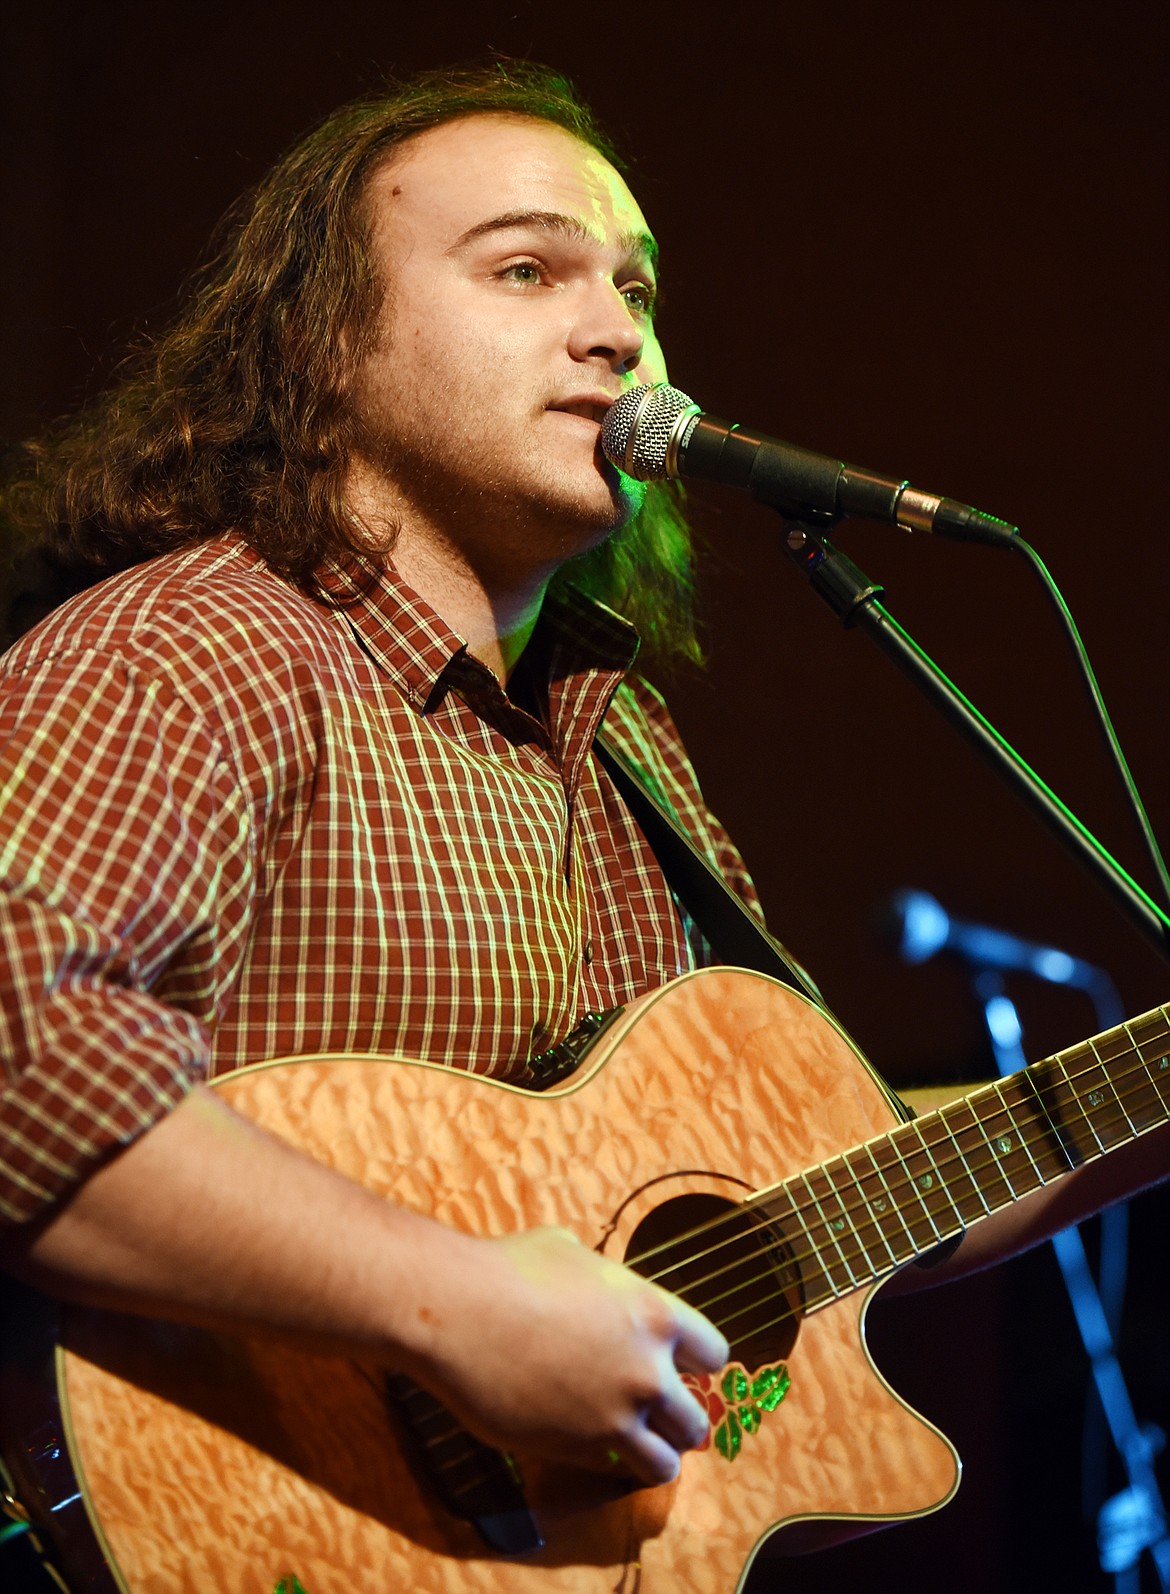 Colten Sea sings at the Kalispell Music Festival on Sunday, Nov. 5, at the Eagles. (Brenda Ahearn/This Week in the Flathead)